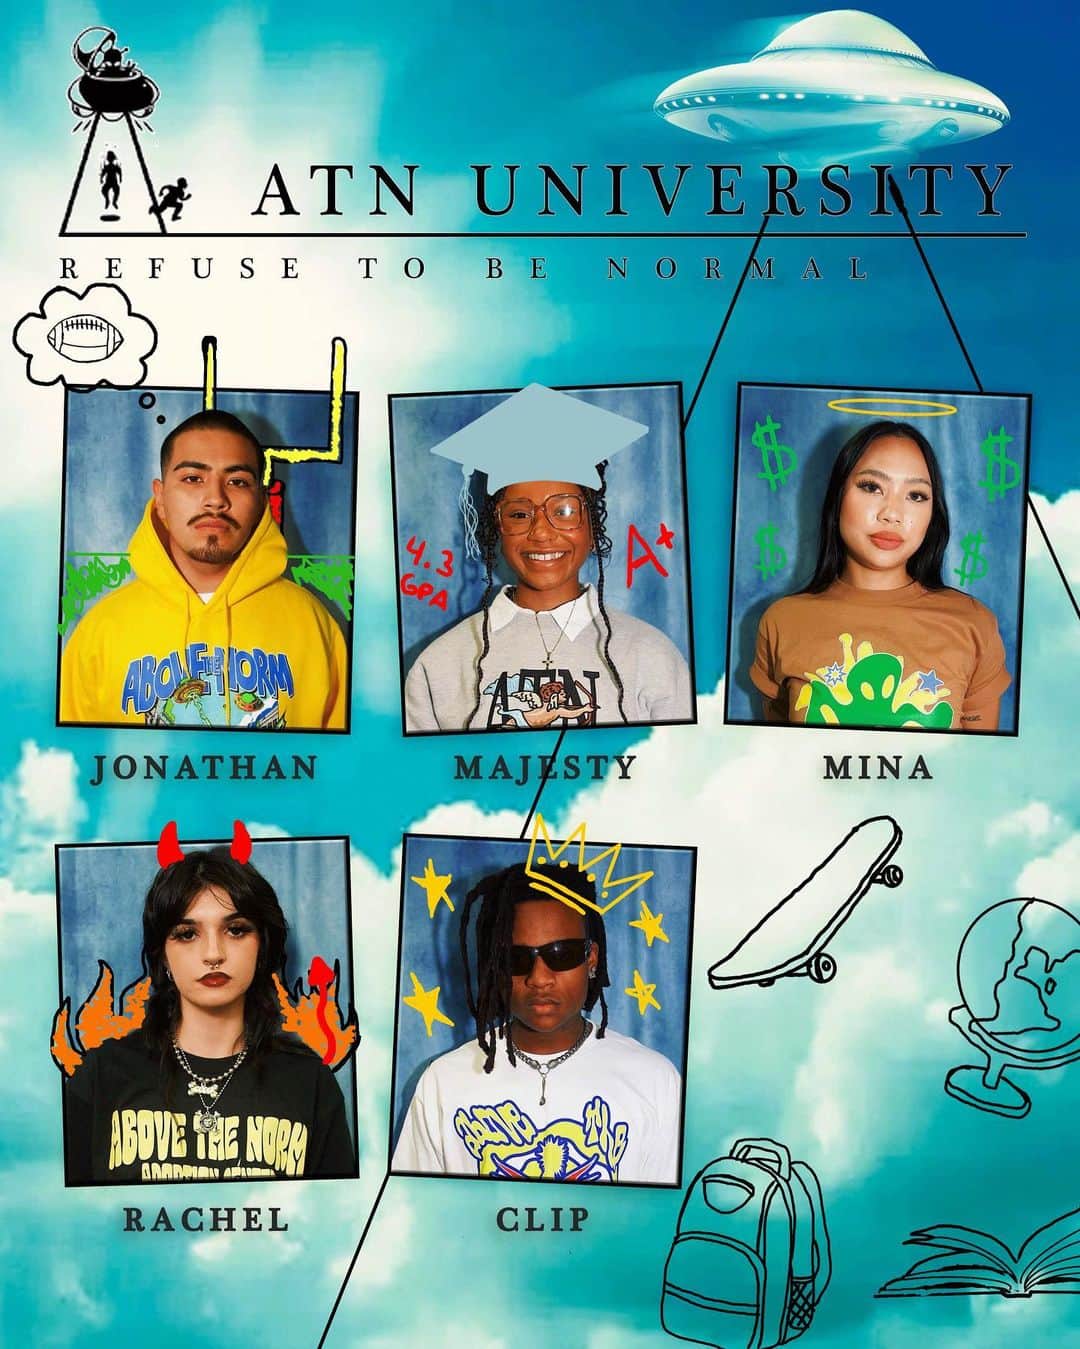 zumiezのインスタグラム：「Introducing The “ATN UNIVERSITY” Official Lookbook & Capsule OUT NOW📚🎓🏫  The full lookbook & capsule are now available for viewing & purchase via our website showcasing 5 unique garments that will add an A+ to styling any wardrobe. 😎✅  Make sure you hop online or hit a @zumiez location near you soon and ask them about ATN 🛸  Creative Direction/Stylist: @africanthunder Models: @pumponjon @majestyydolll @kill444mina @sunflowaaz @2900clip  Photo: @fatjesus562  Stylist Assistant: @lili.mae GFX: @trvs_bkr + @africanthunder」